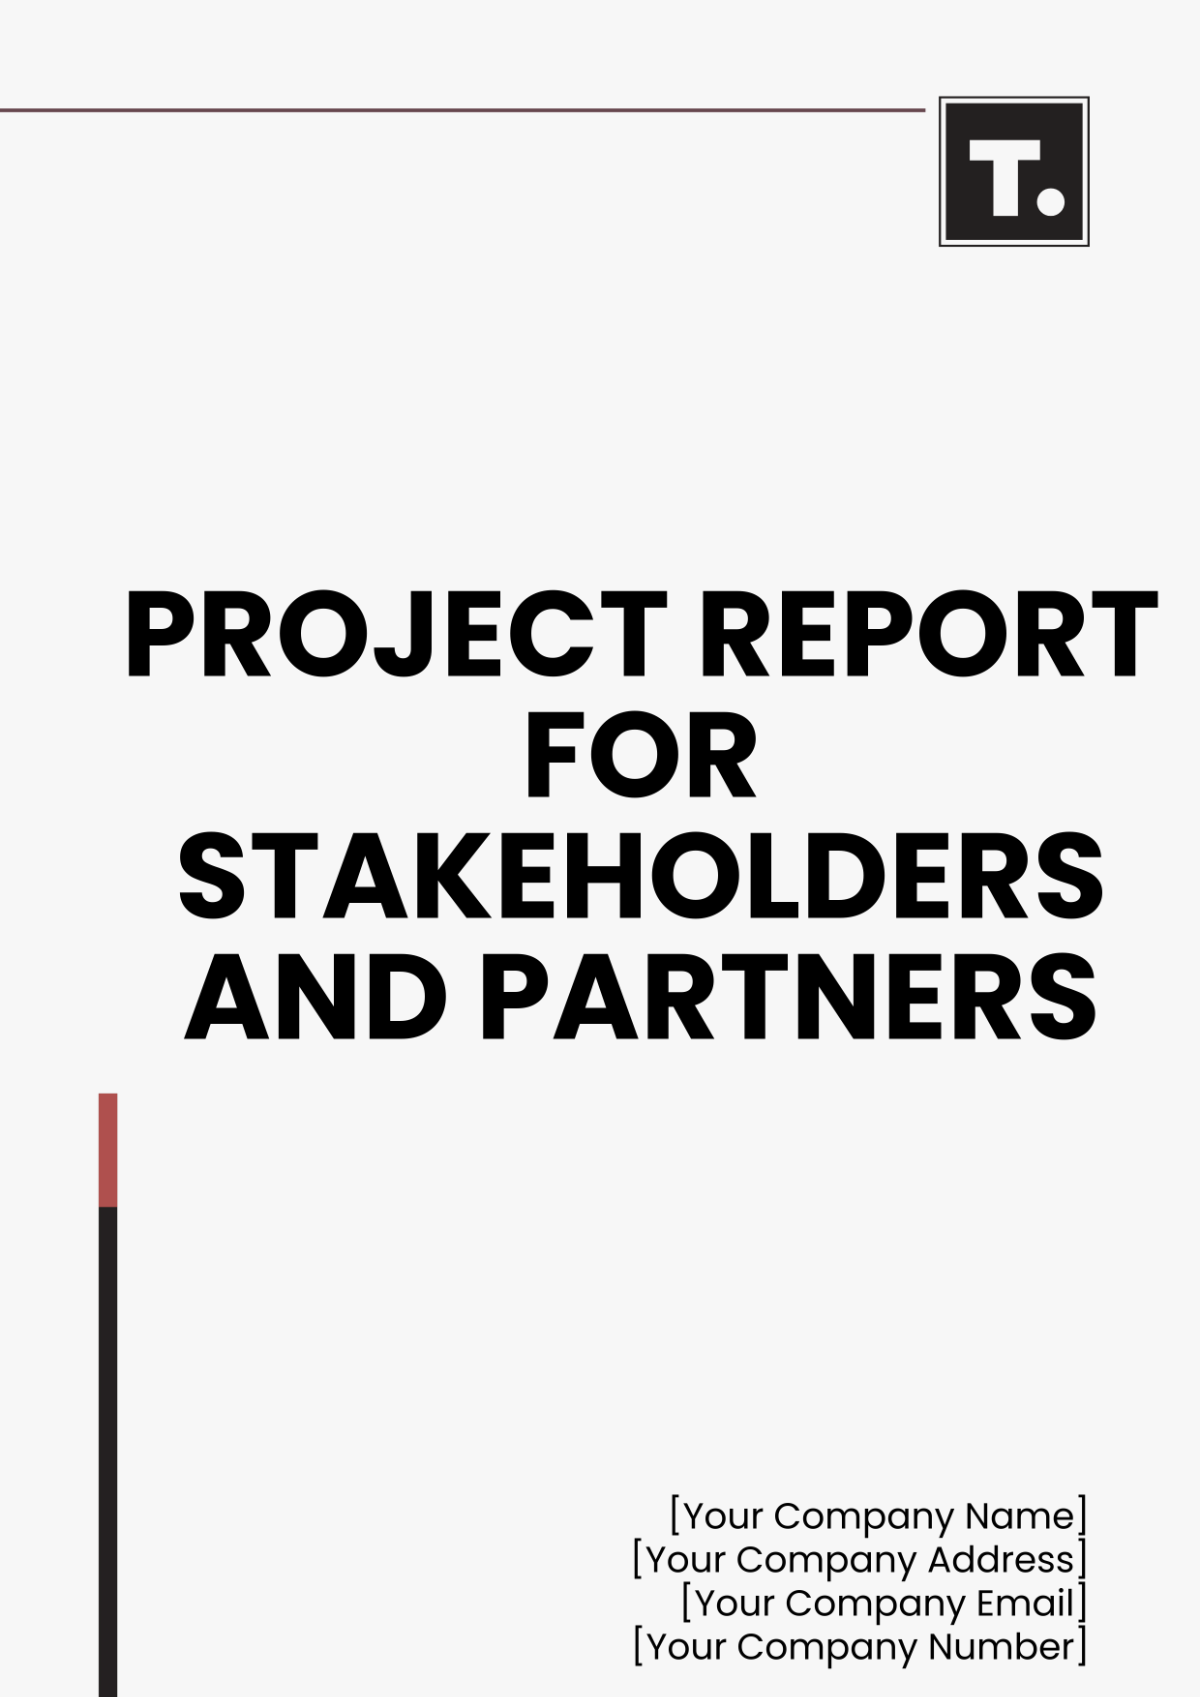 Project Report For Stakeholders And Partners Template